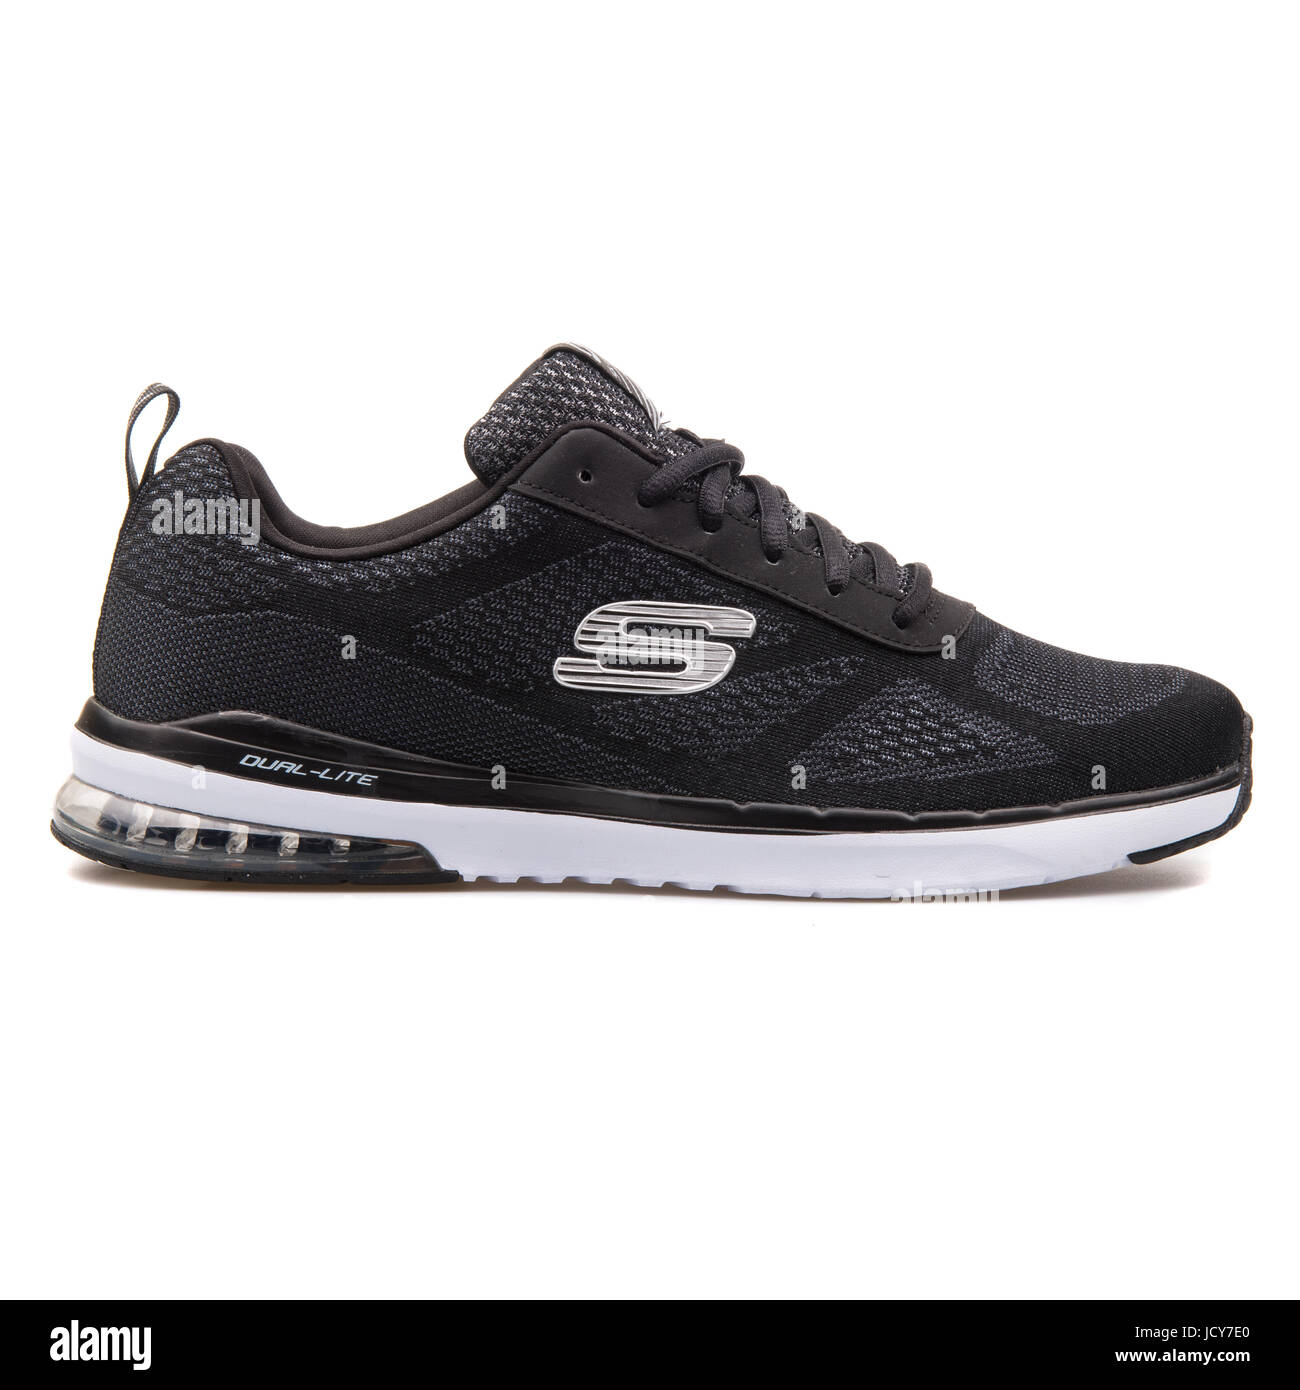 Goma de dinero Todos inyectar Sketchers Skech-Air Infinity Black and White Men's Running Shoes - 51480-BKW  Stock Photo - Alamy